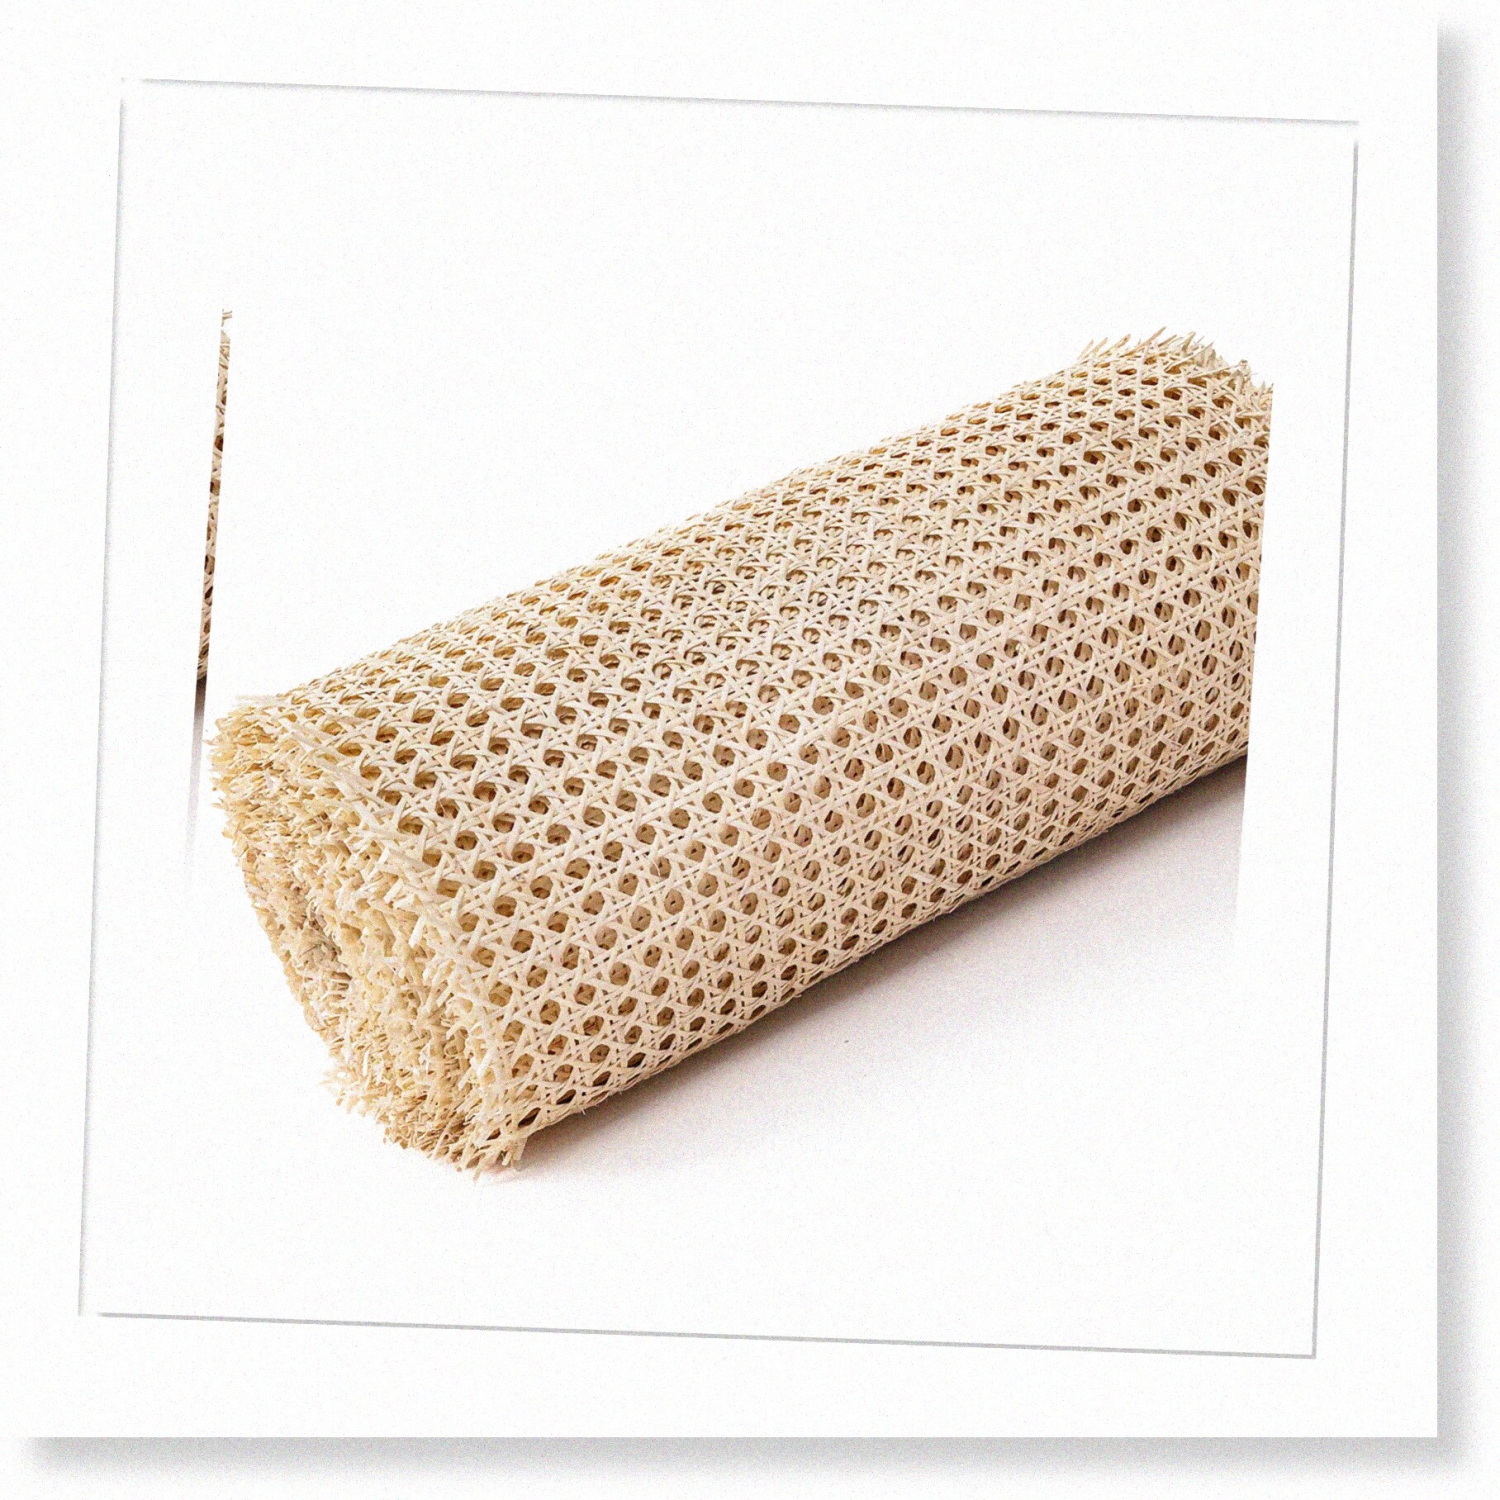 Natural Rattan Cane Webbing Roll - 18" Width x 5 Feet - Hexagon Weave - Pre-Woven 1/2 Inch Mesh Net - Open Weave Wicker Cane Webbing - Ideal for Cabinets and Chairs